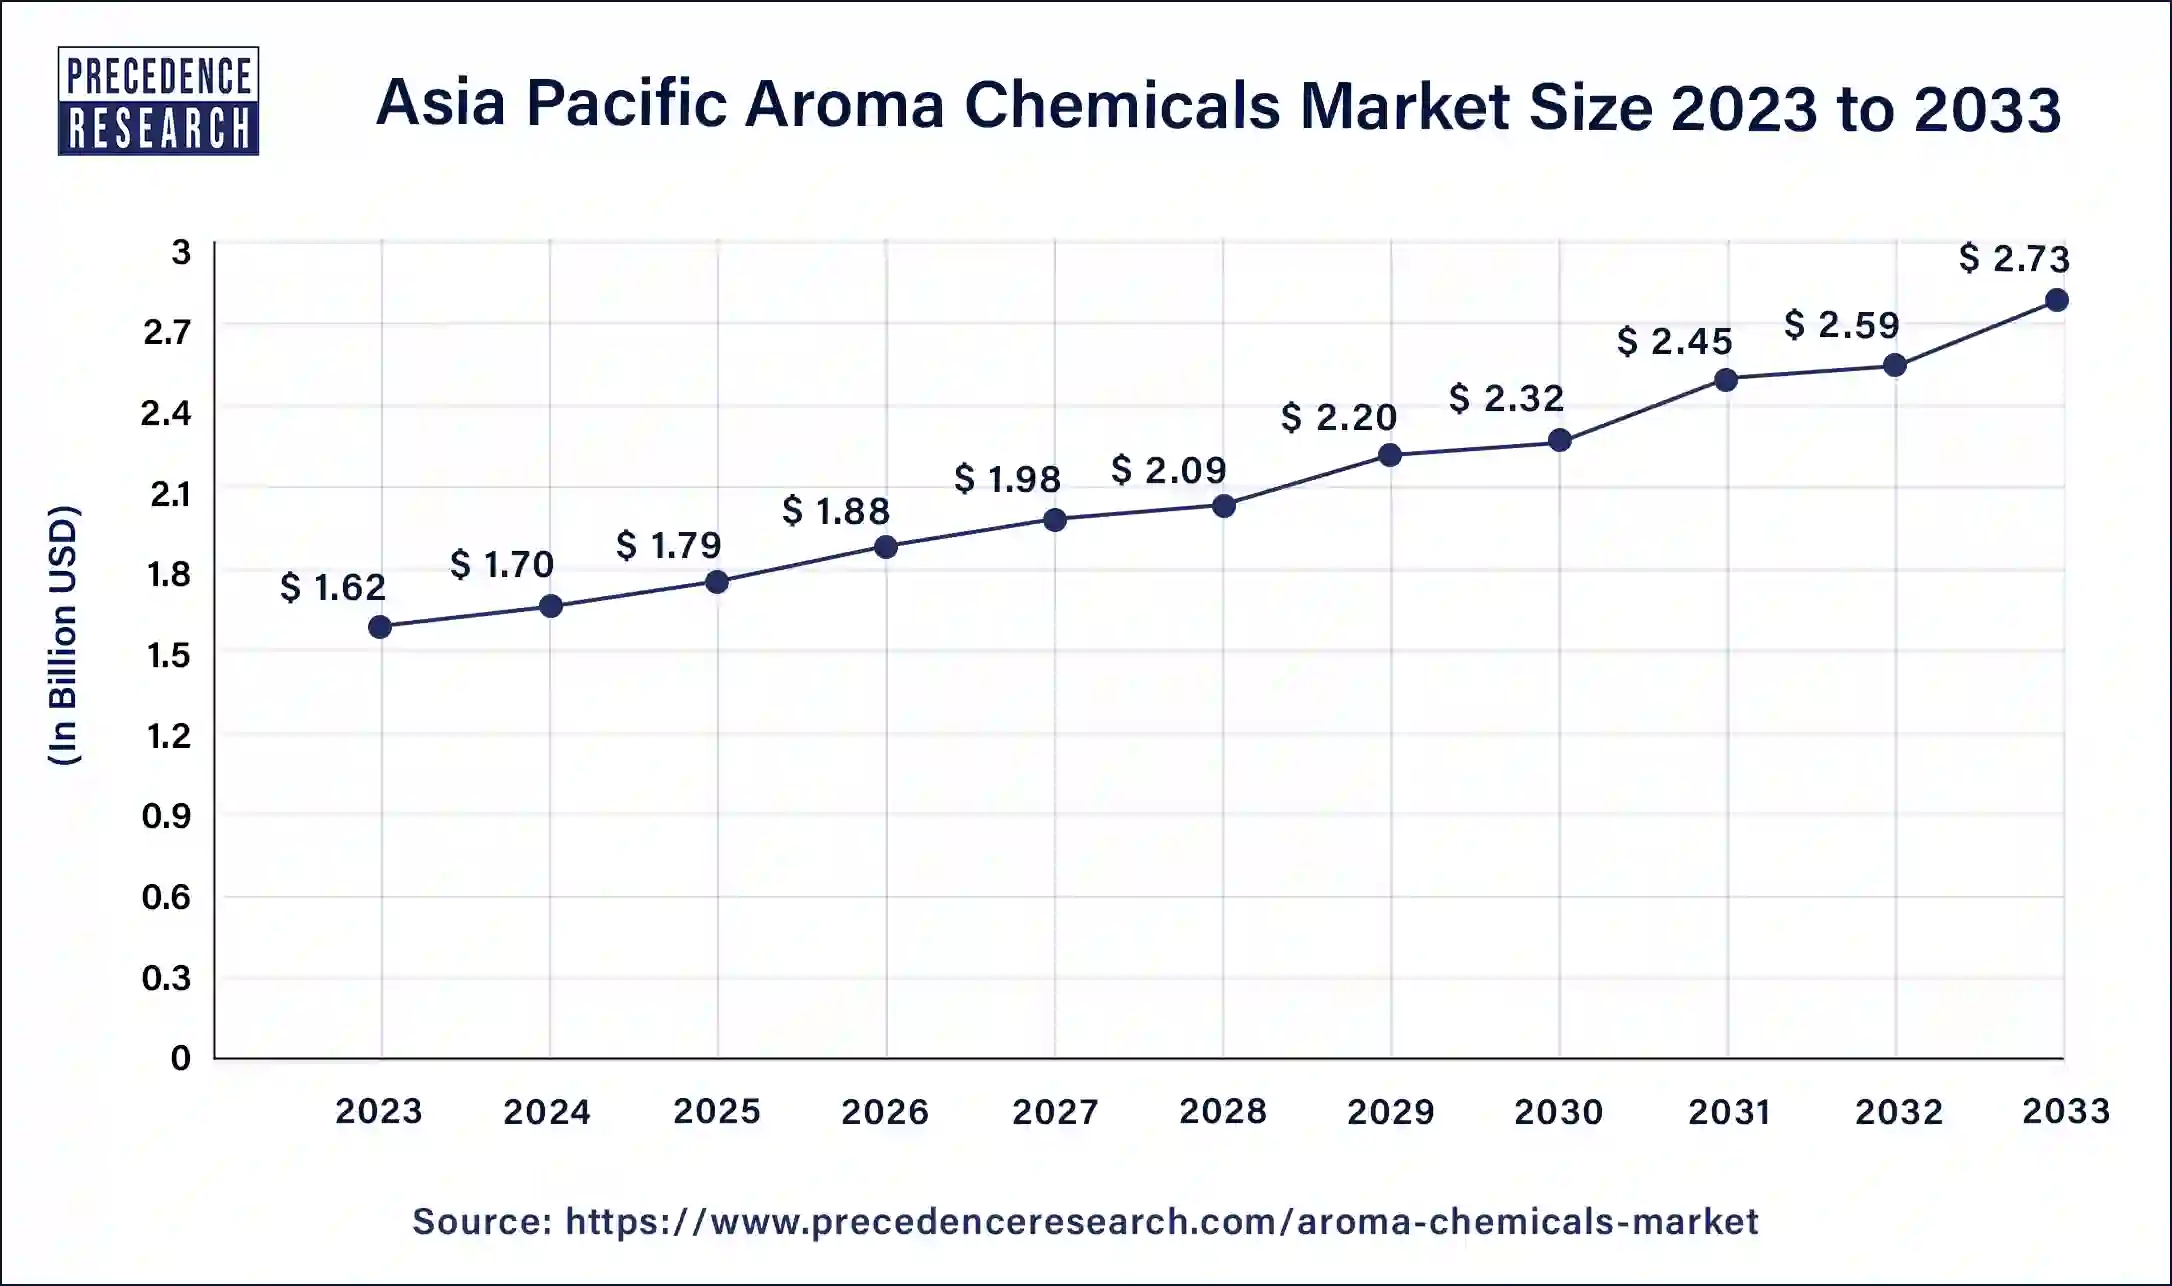 Asia Pacific Aroma Chemicals Market Size 2024 to 2033